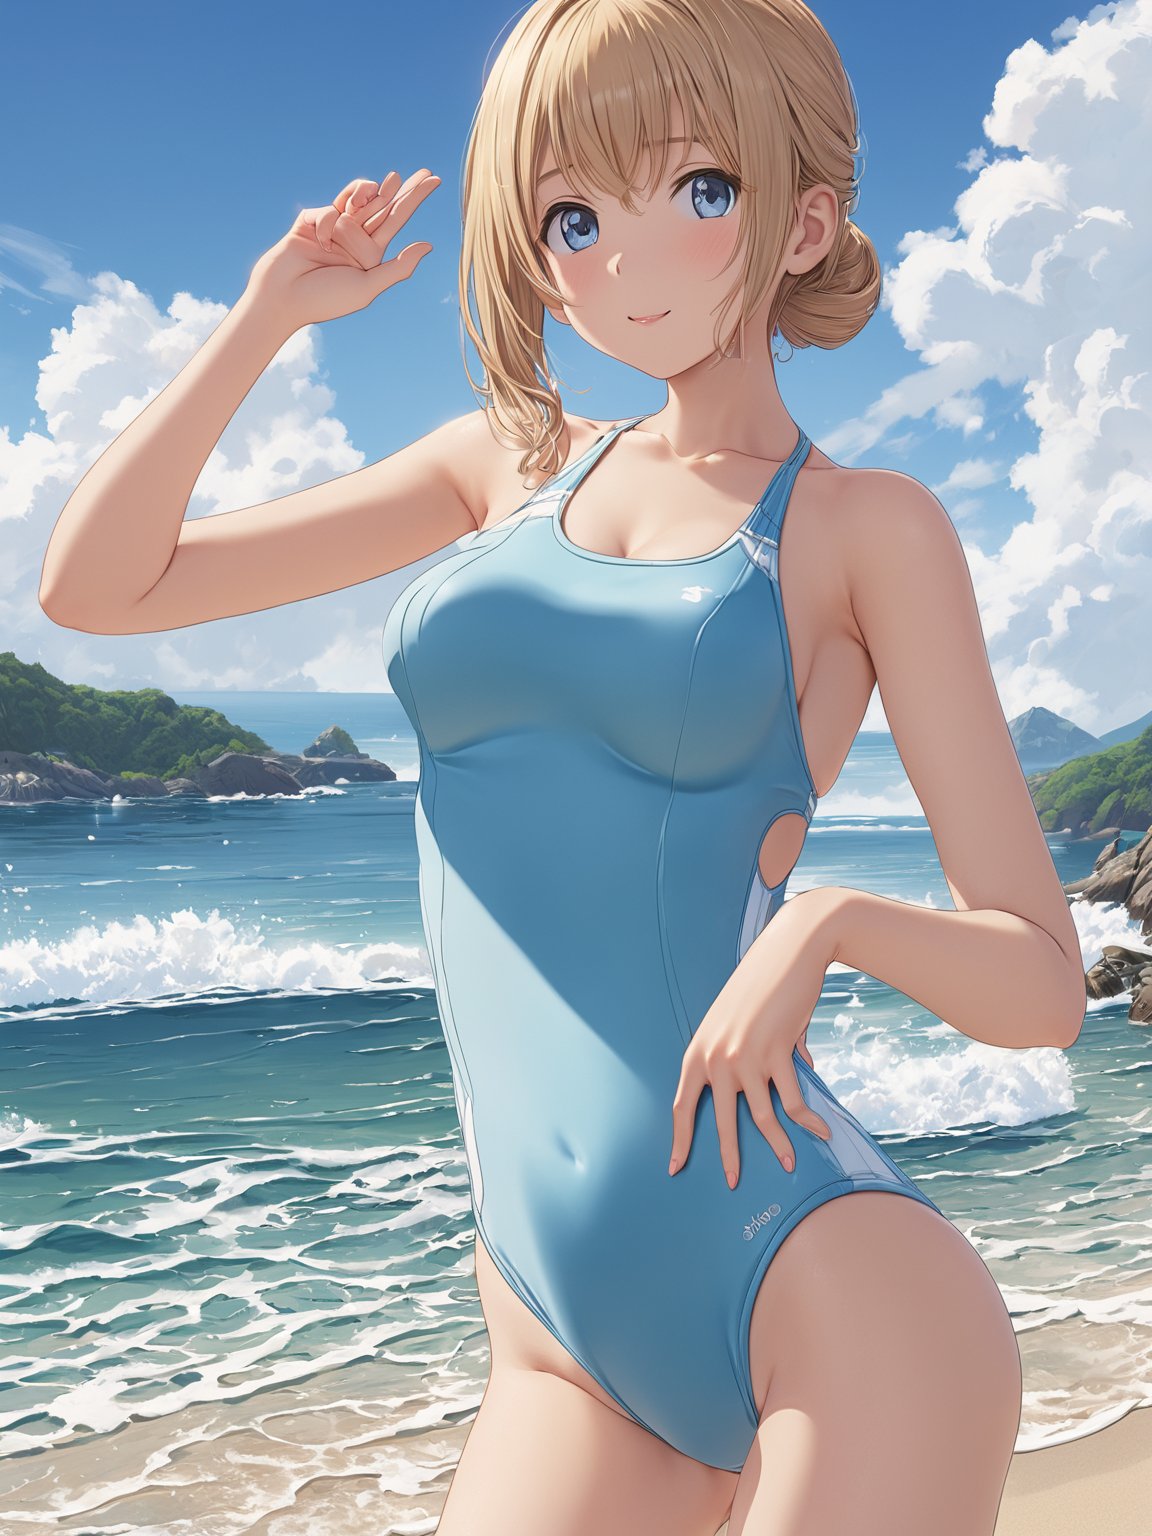 //Quality,
masterpiece, best quality, ultra detailed, 8K-UHD
,//Character,
1girl, solo
,//Fashion,
swim_suit
,//Background,
sky, outdoor, seaside
,//Others,
,SakuyaTsuitachiStyle